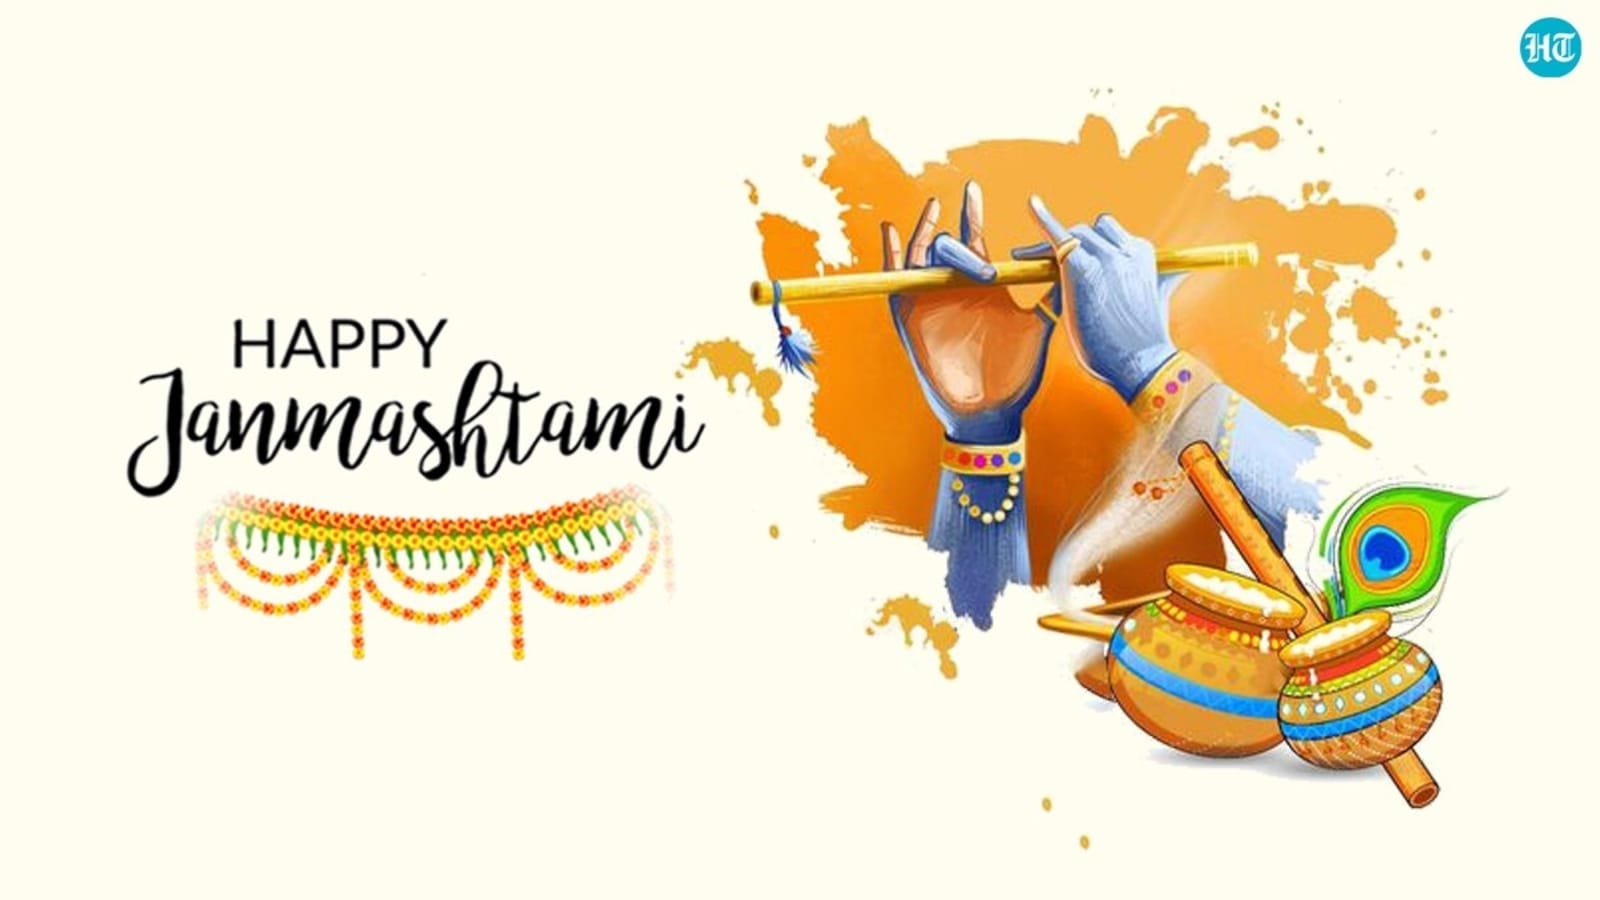 Outstanding Assortment of Top 999+ High-Definition Janmashtami Images in Full 4K